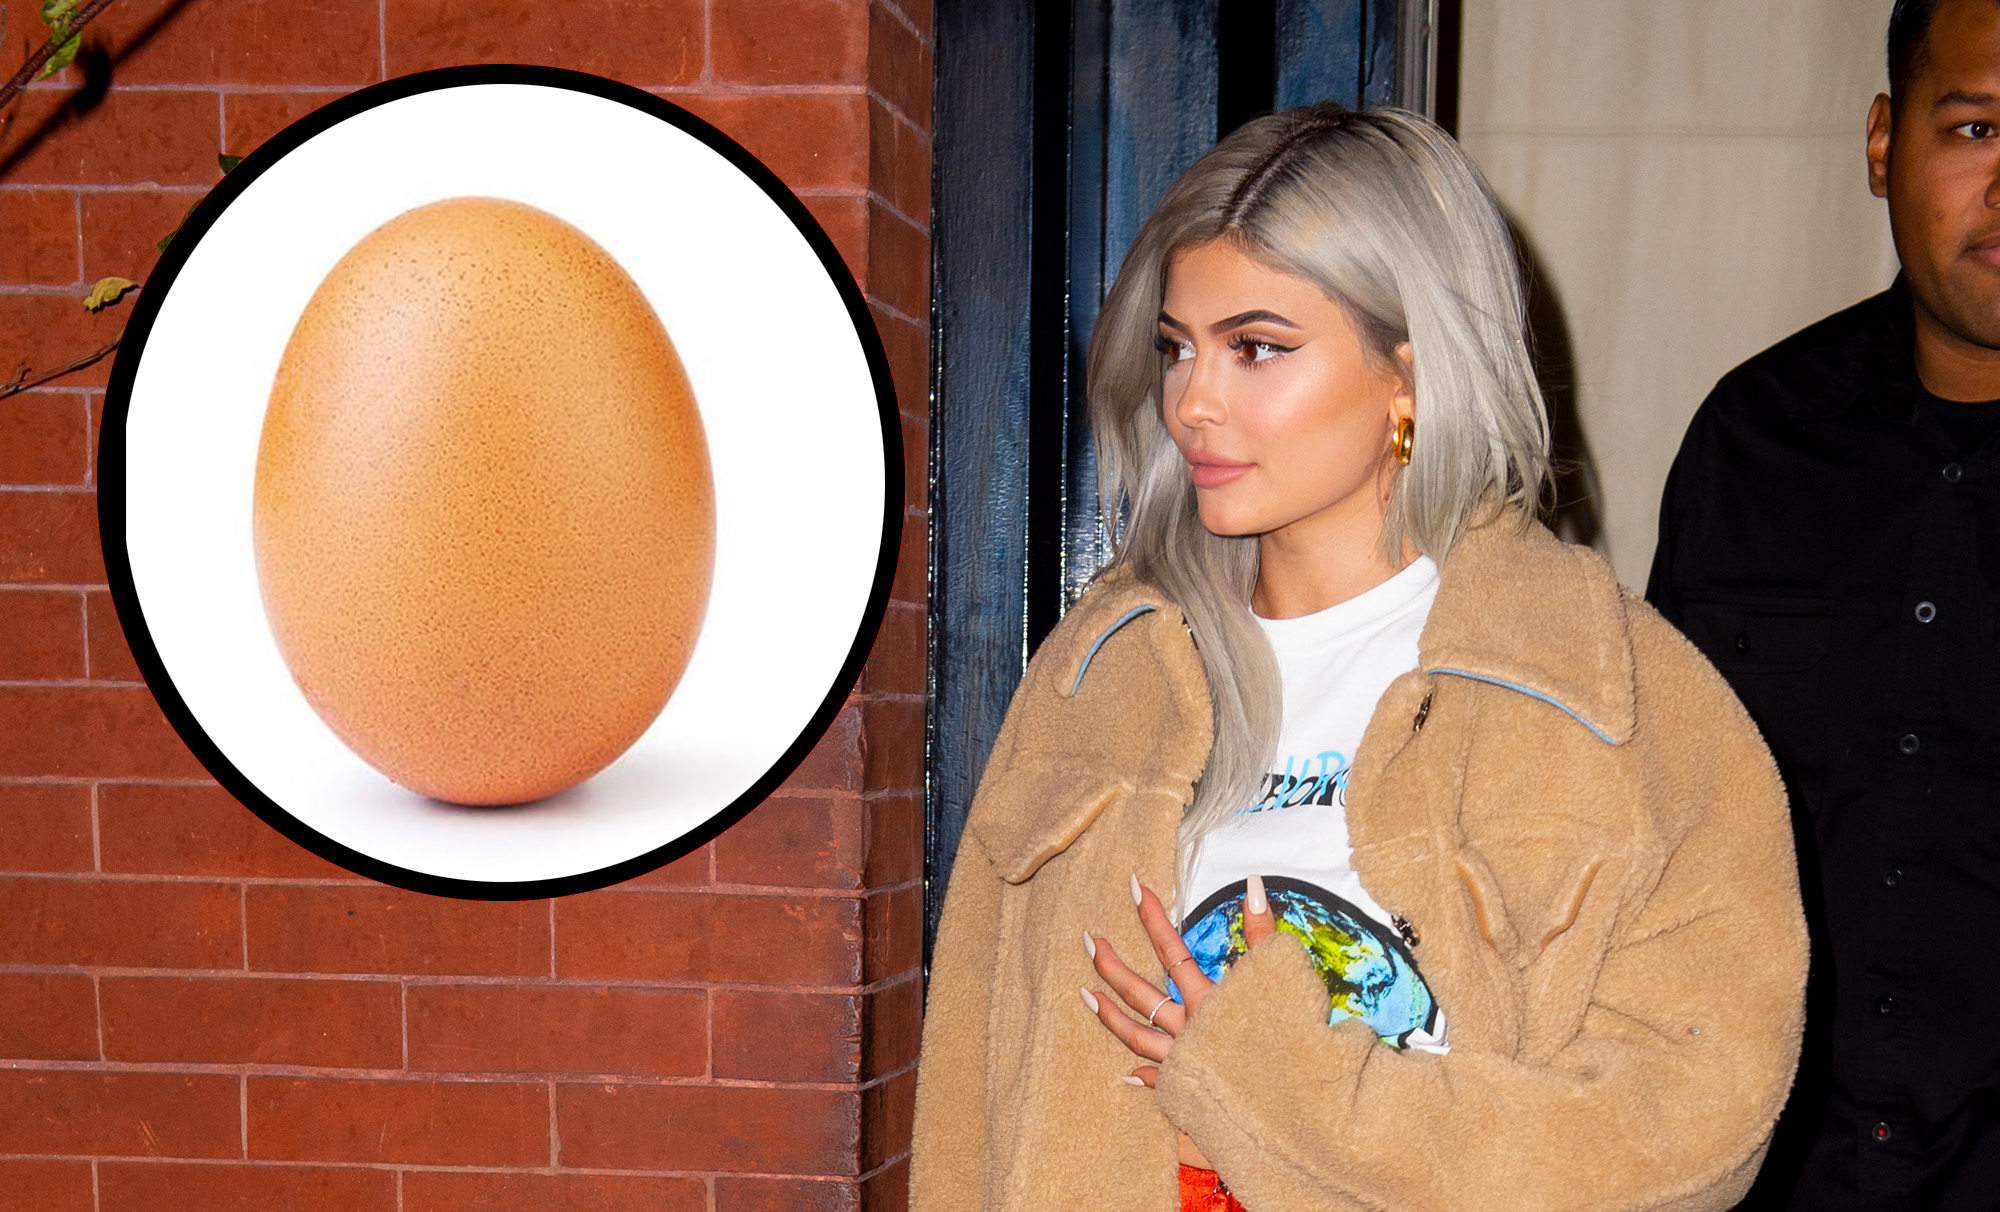 How an egg beat Kylie Jenner at her own Instagram game, Instagram